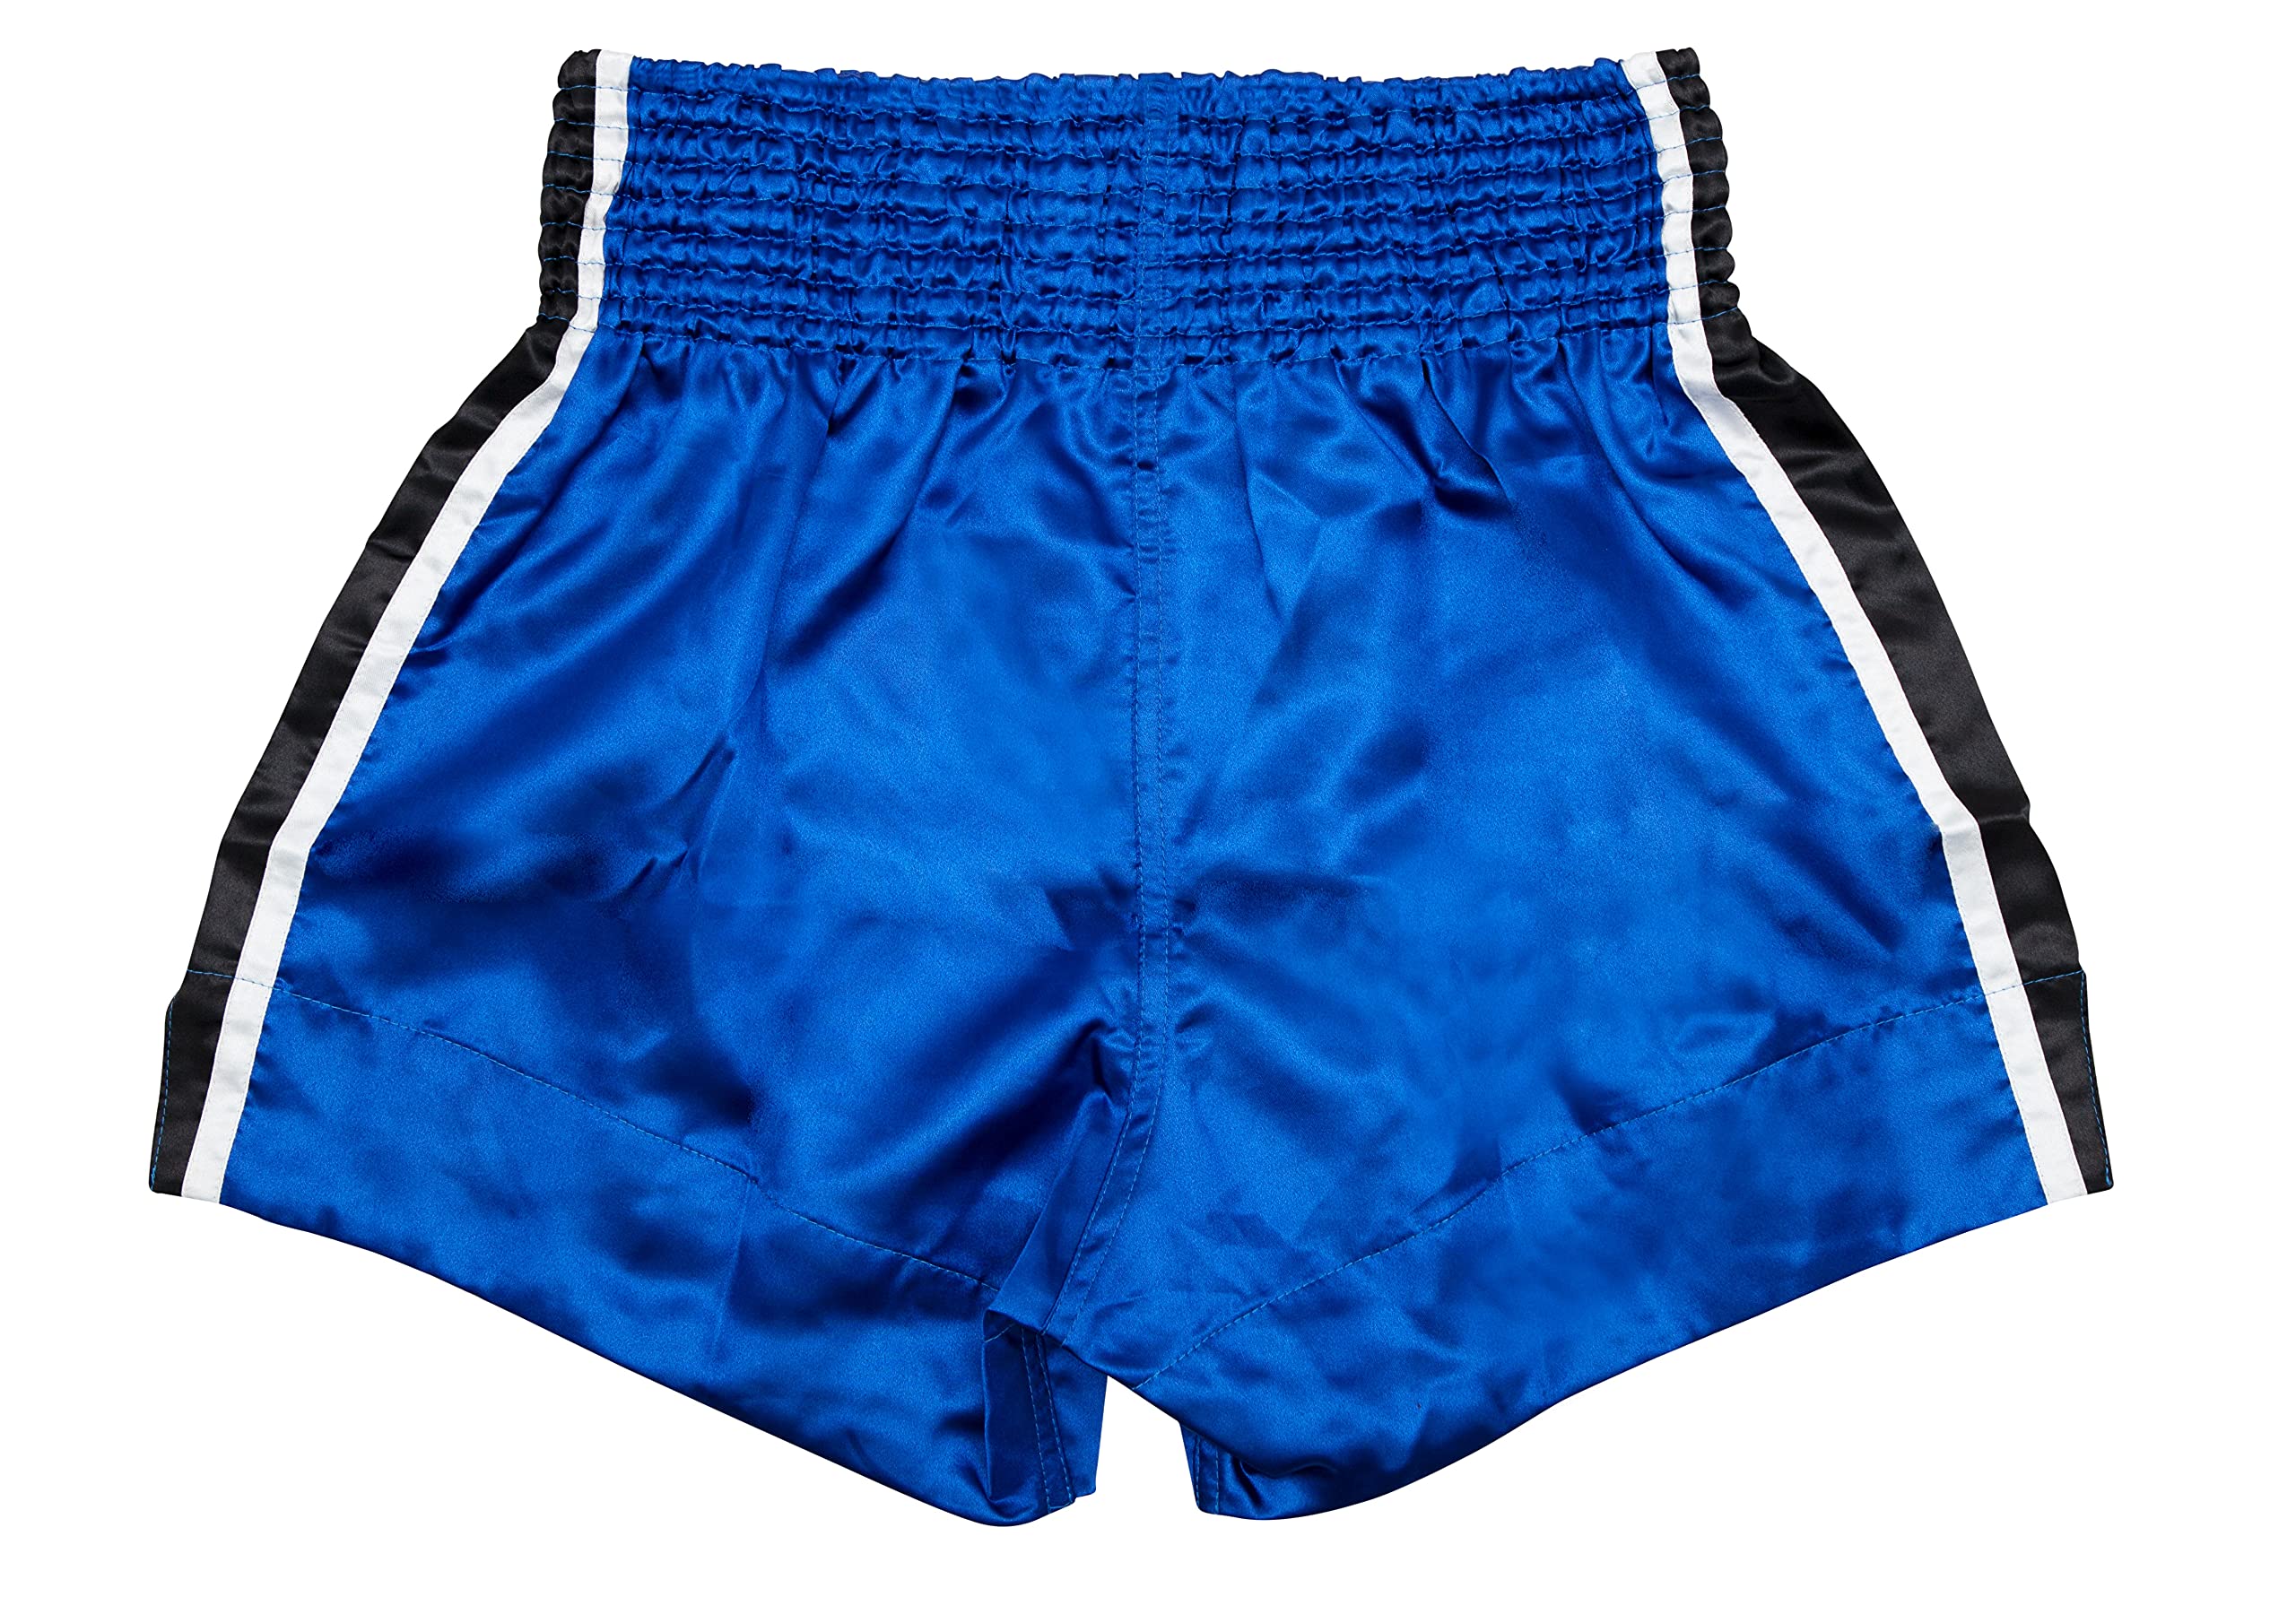 Muay Thai Shorts up to 60% OFF, 1 Year Warranty